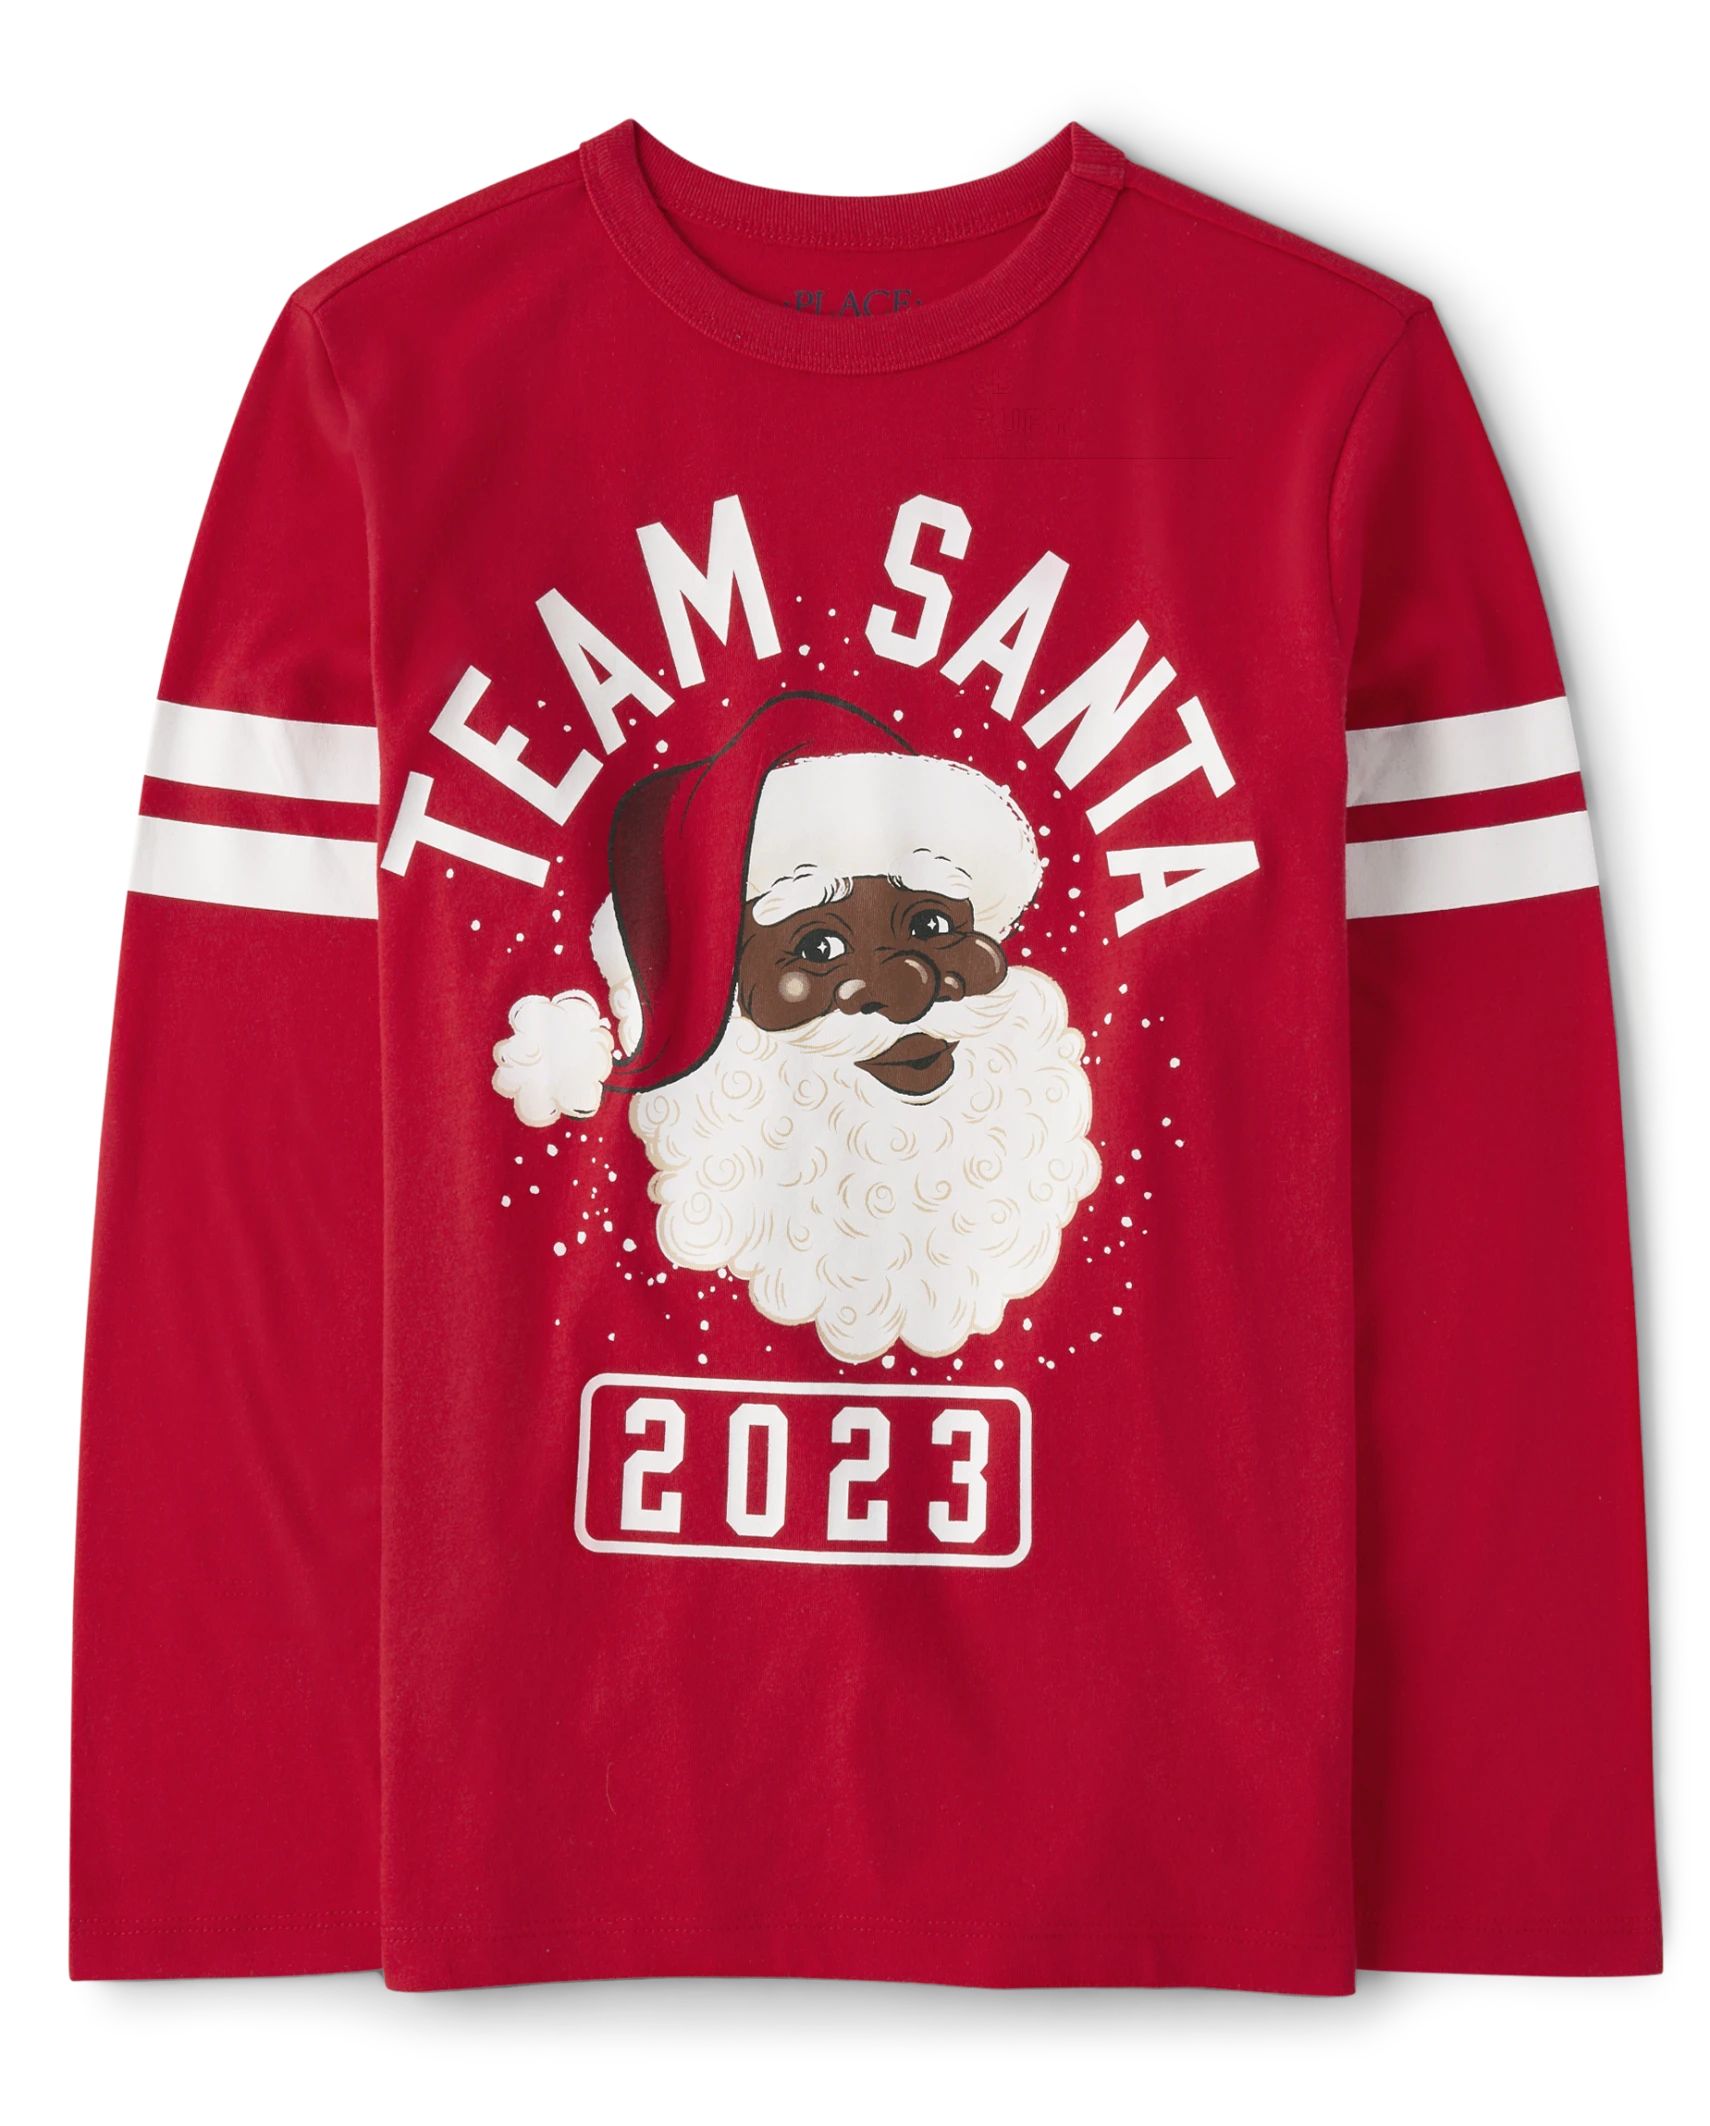 Unisex Kids Matching Family Team Santa Graphic Tee - ruby | The Children's Place